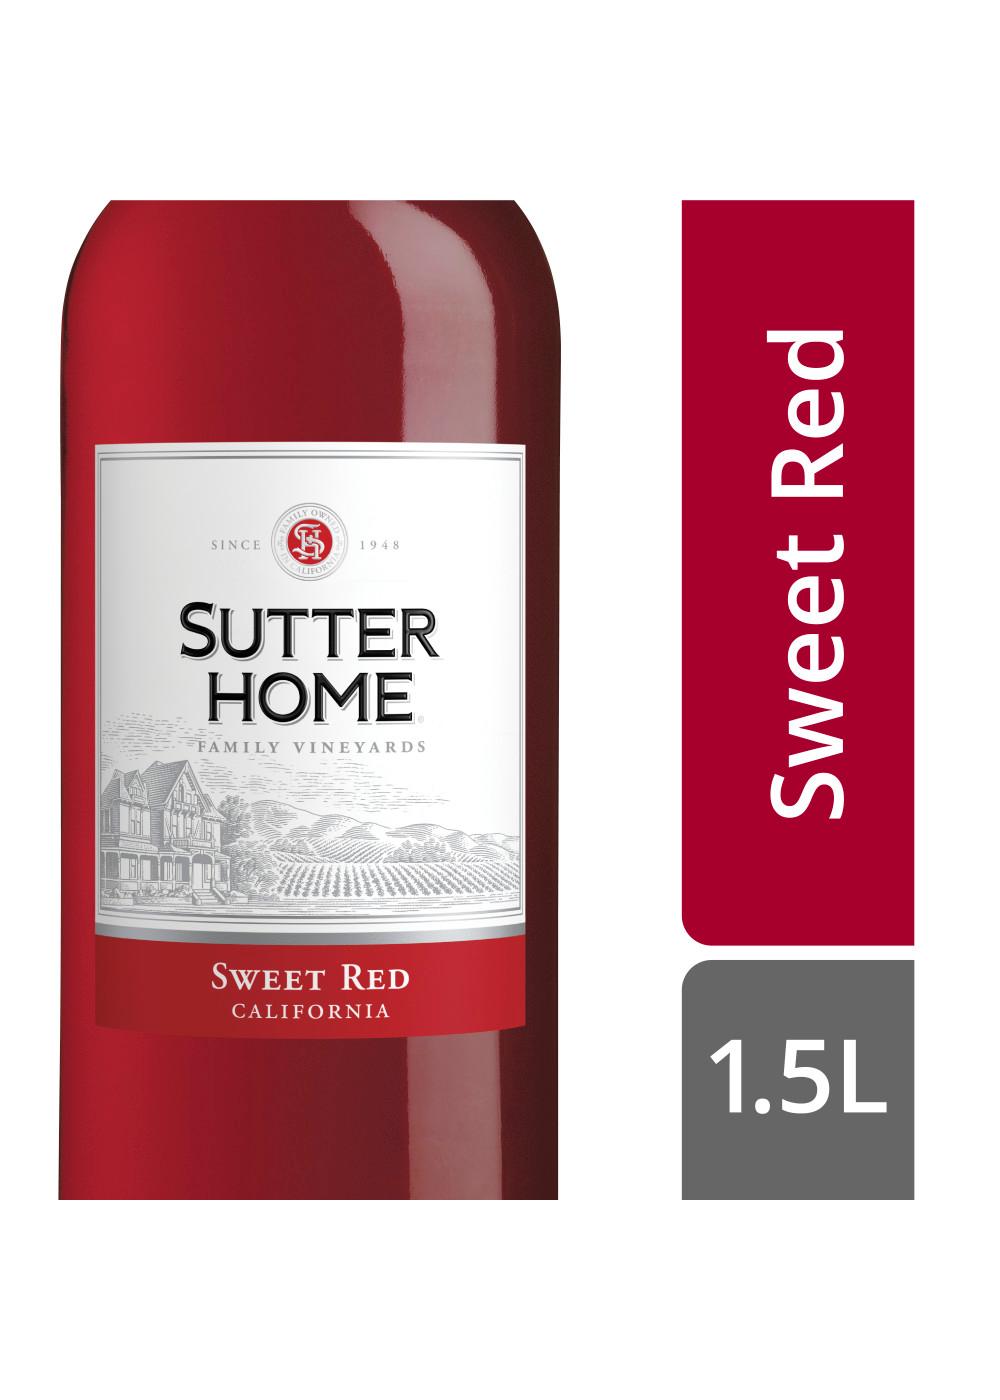 Sutter Home Family Vineyards Sweet Red Wine; image 4 of 4